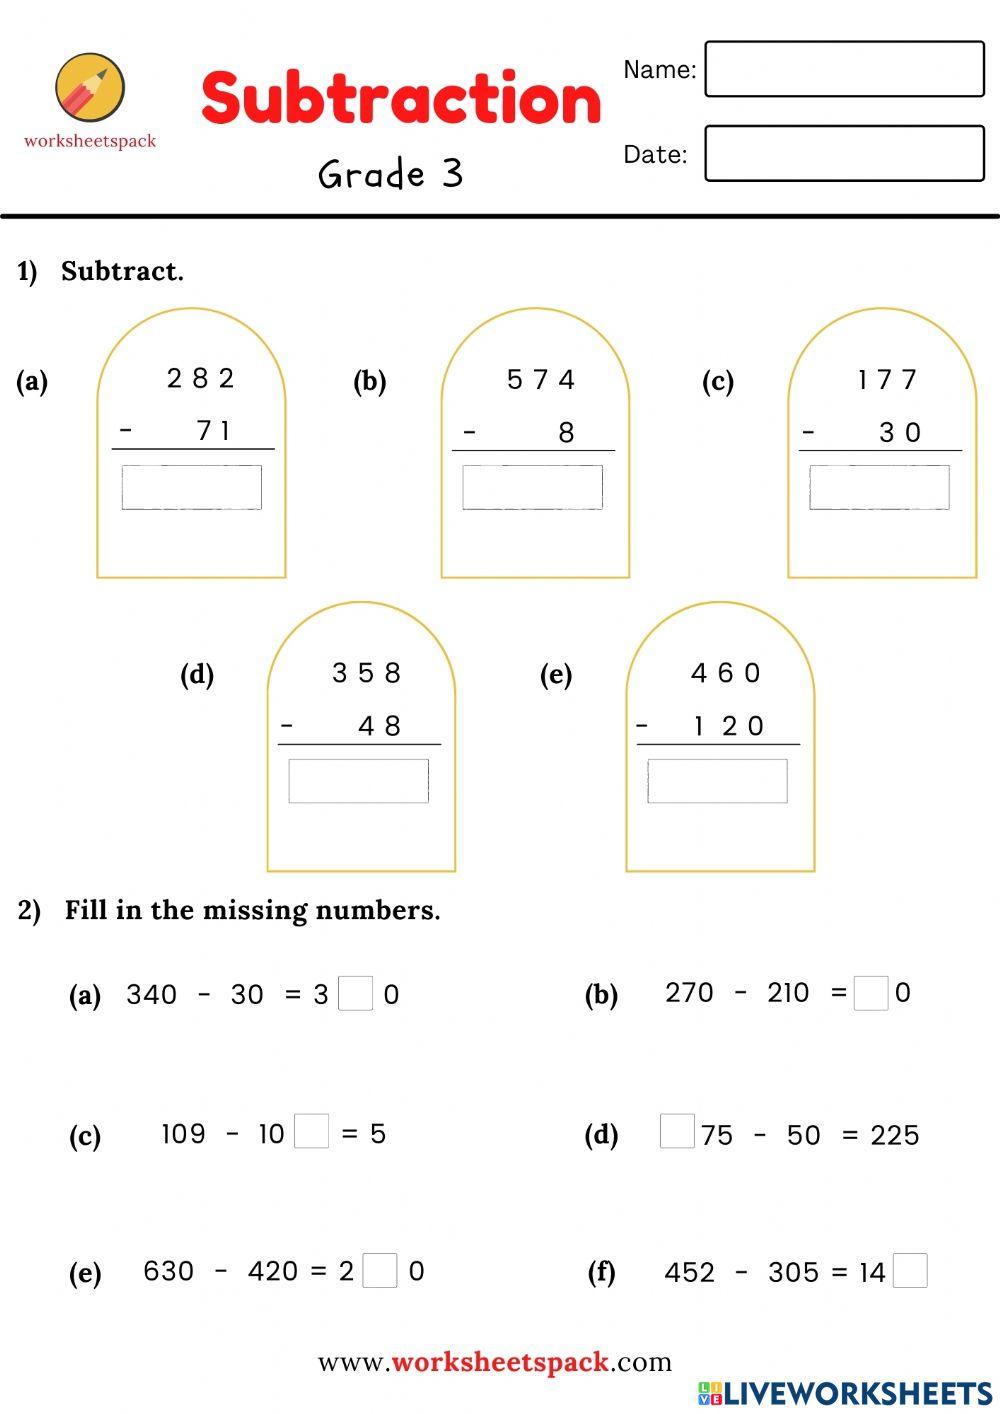 Subtraction fill in the missing numbers